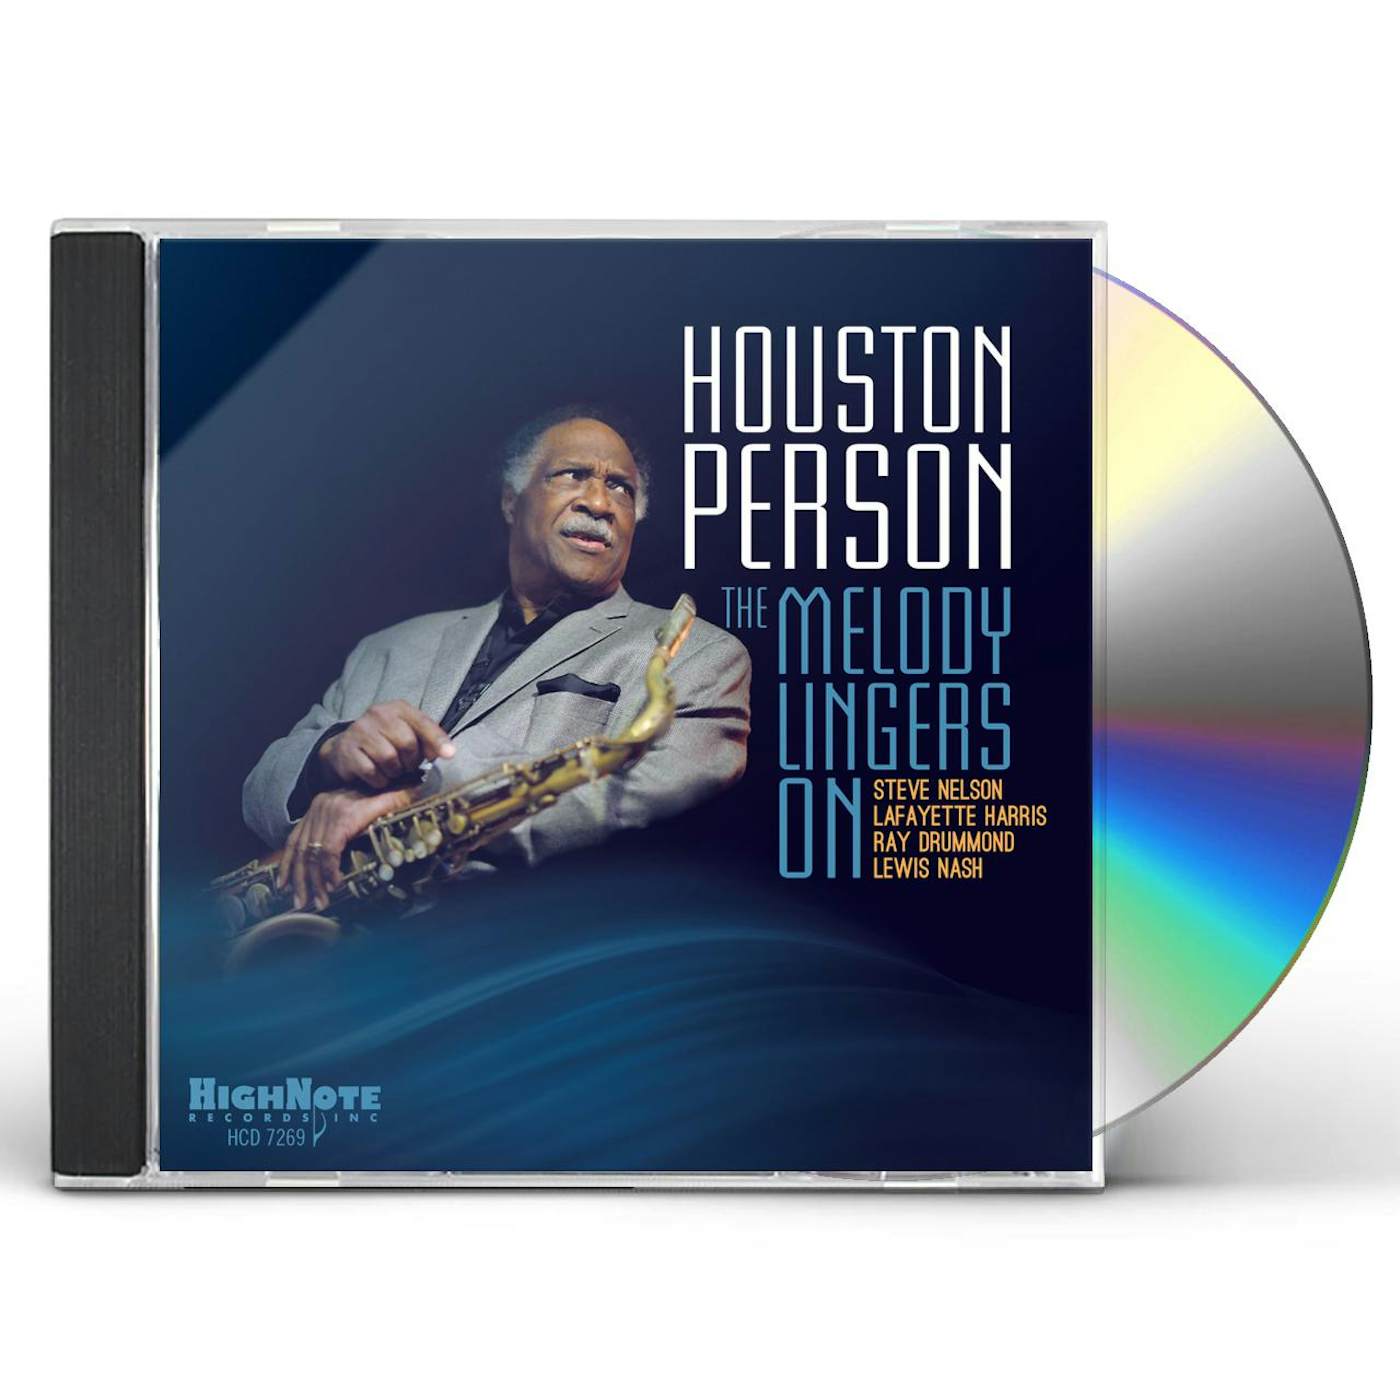 Houston Person MELODY LINGERS ON CD